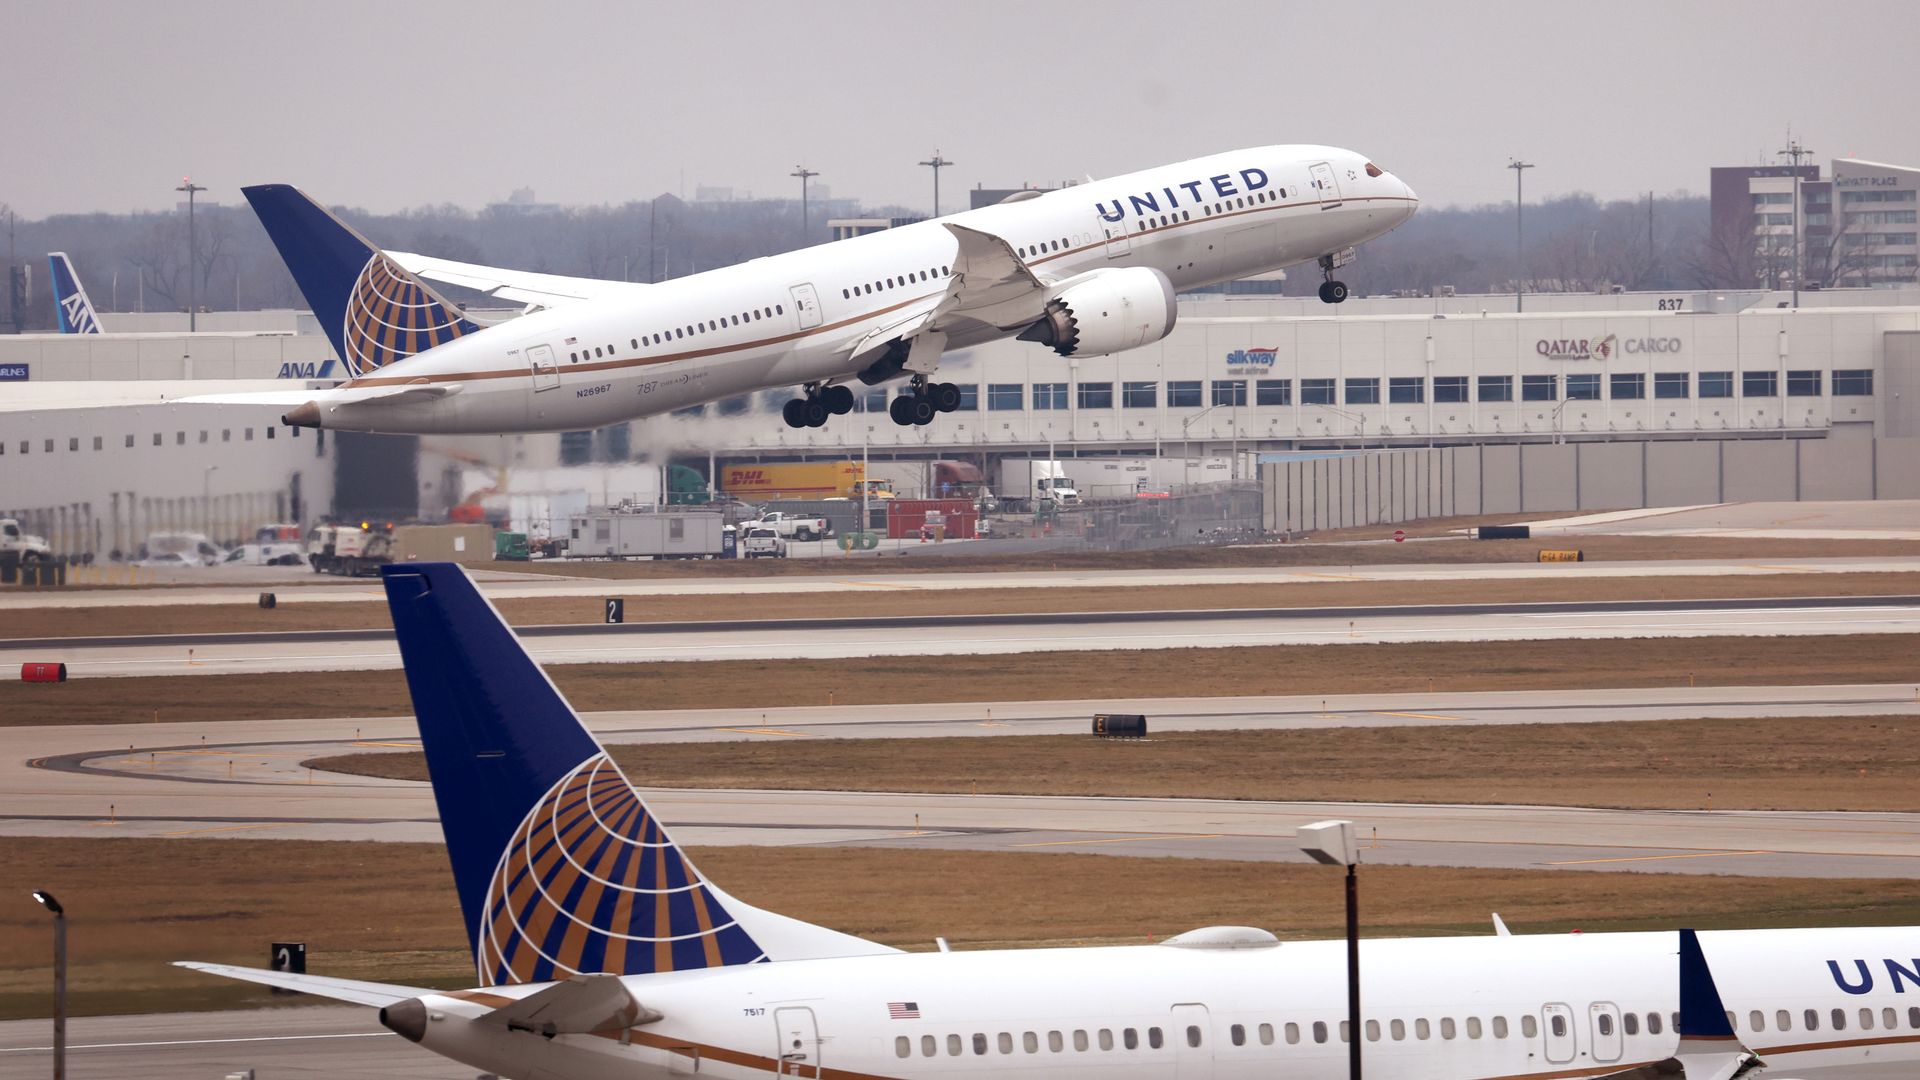 A United Airlines flight lifts off at O'Hare International Airport on December 13, 2022 in Chicago, Illinois..